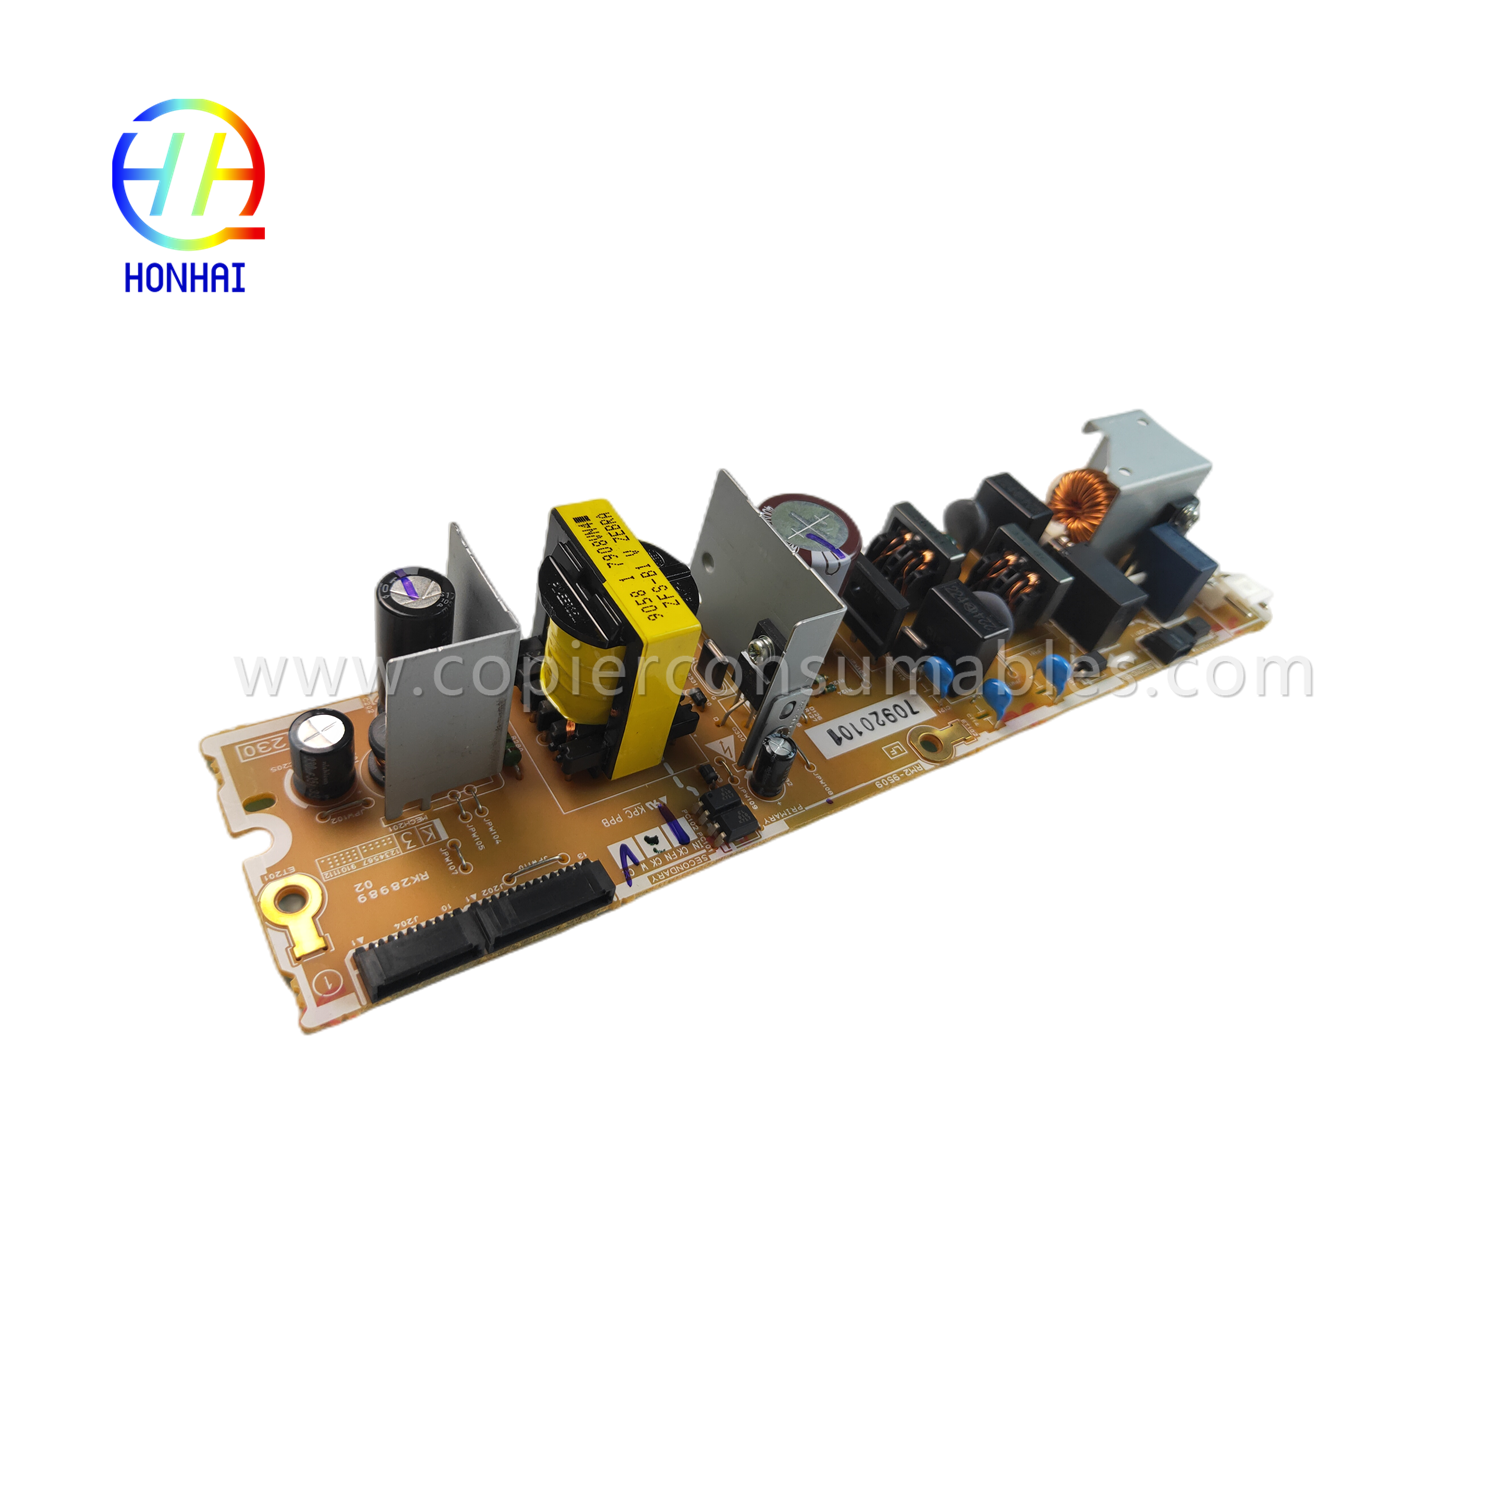 https://www.copierconsumables.com/power-supply-220v-for-hp-color-laserjet-pro-mfp-m283fdw-rm2-2428-ምርት/